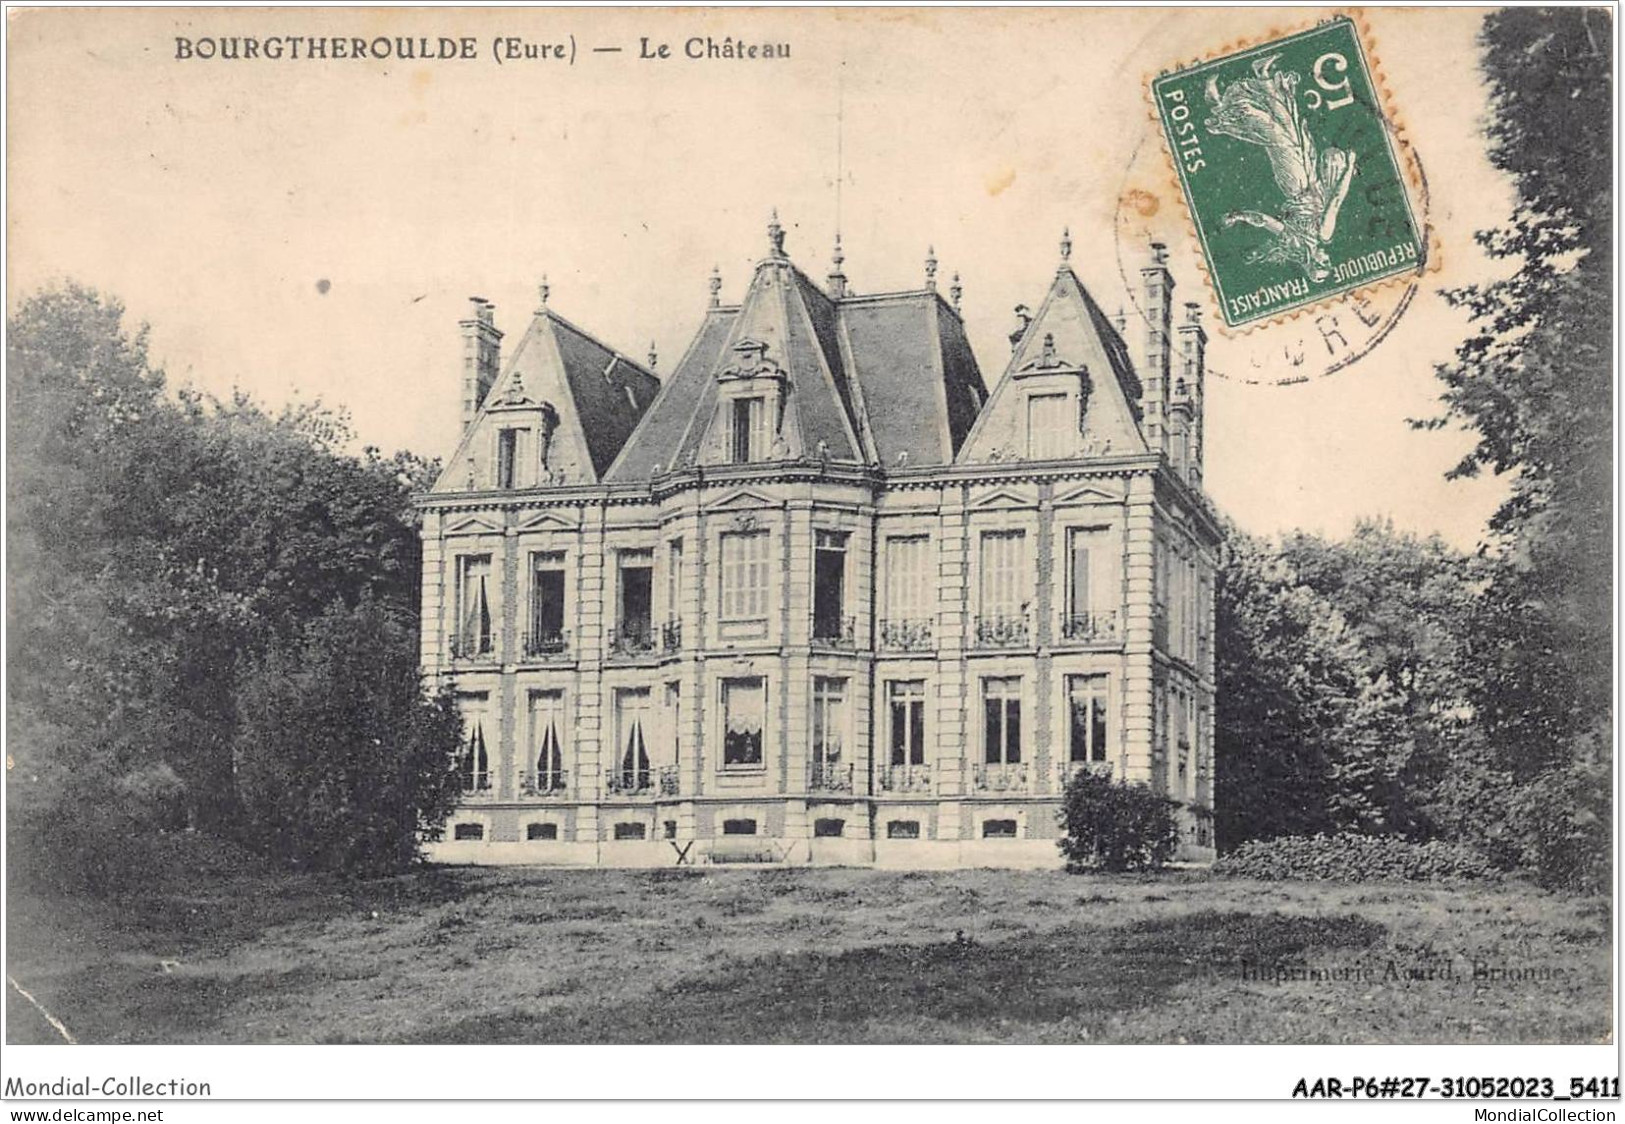 AARP6-0460 - BOURGTHEROULDE - Le Chateau - Bourgtheroulde